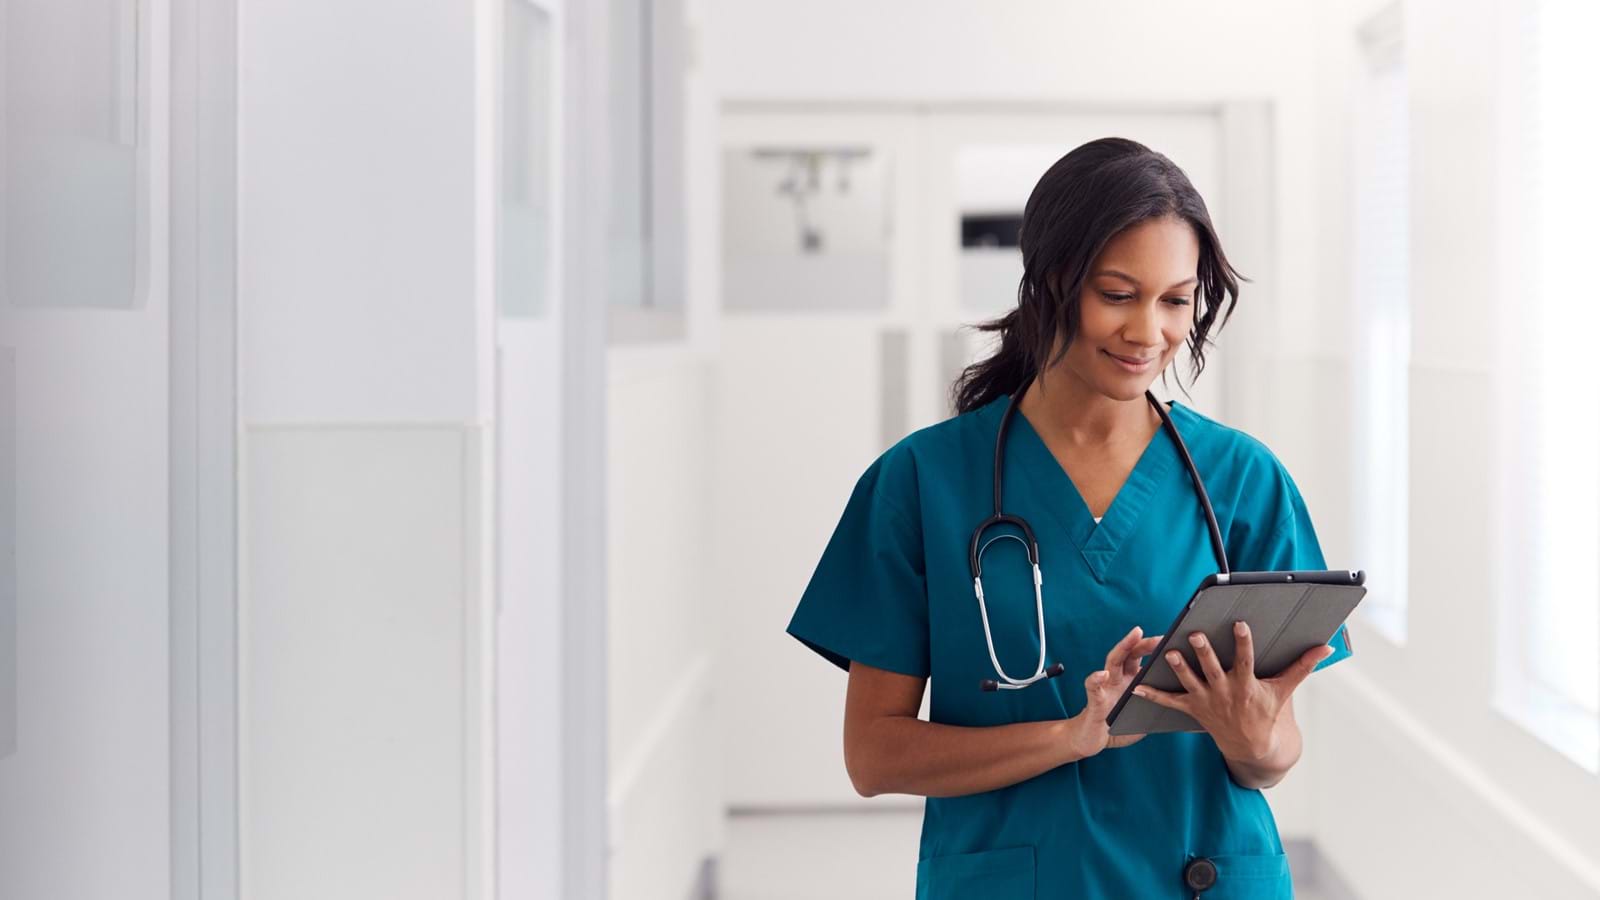 Doctors use digital workplace to discuss with staff